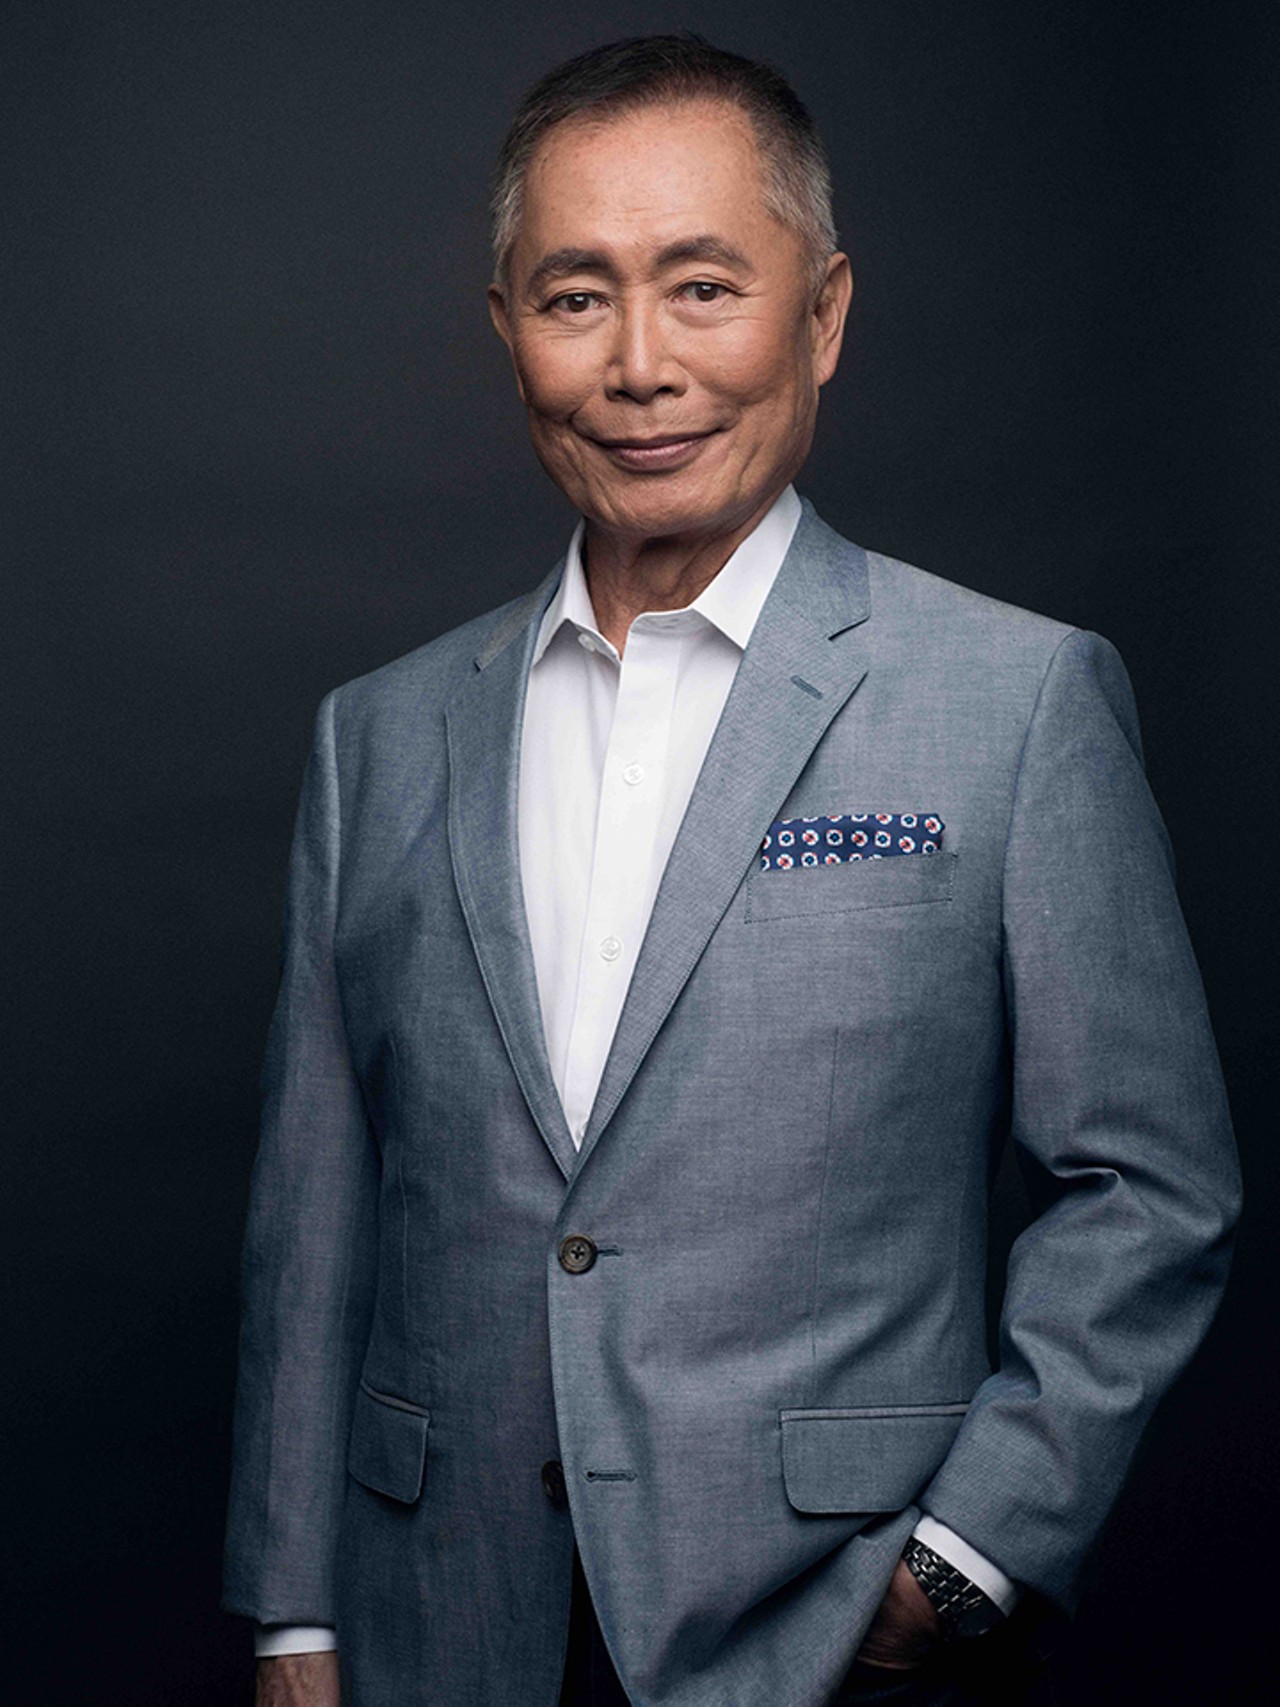 Thursday, Jan. 19George Takei at Warden Arena, Rollins College